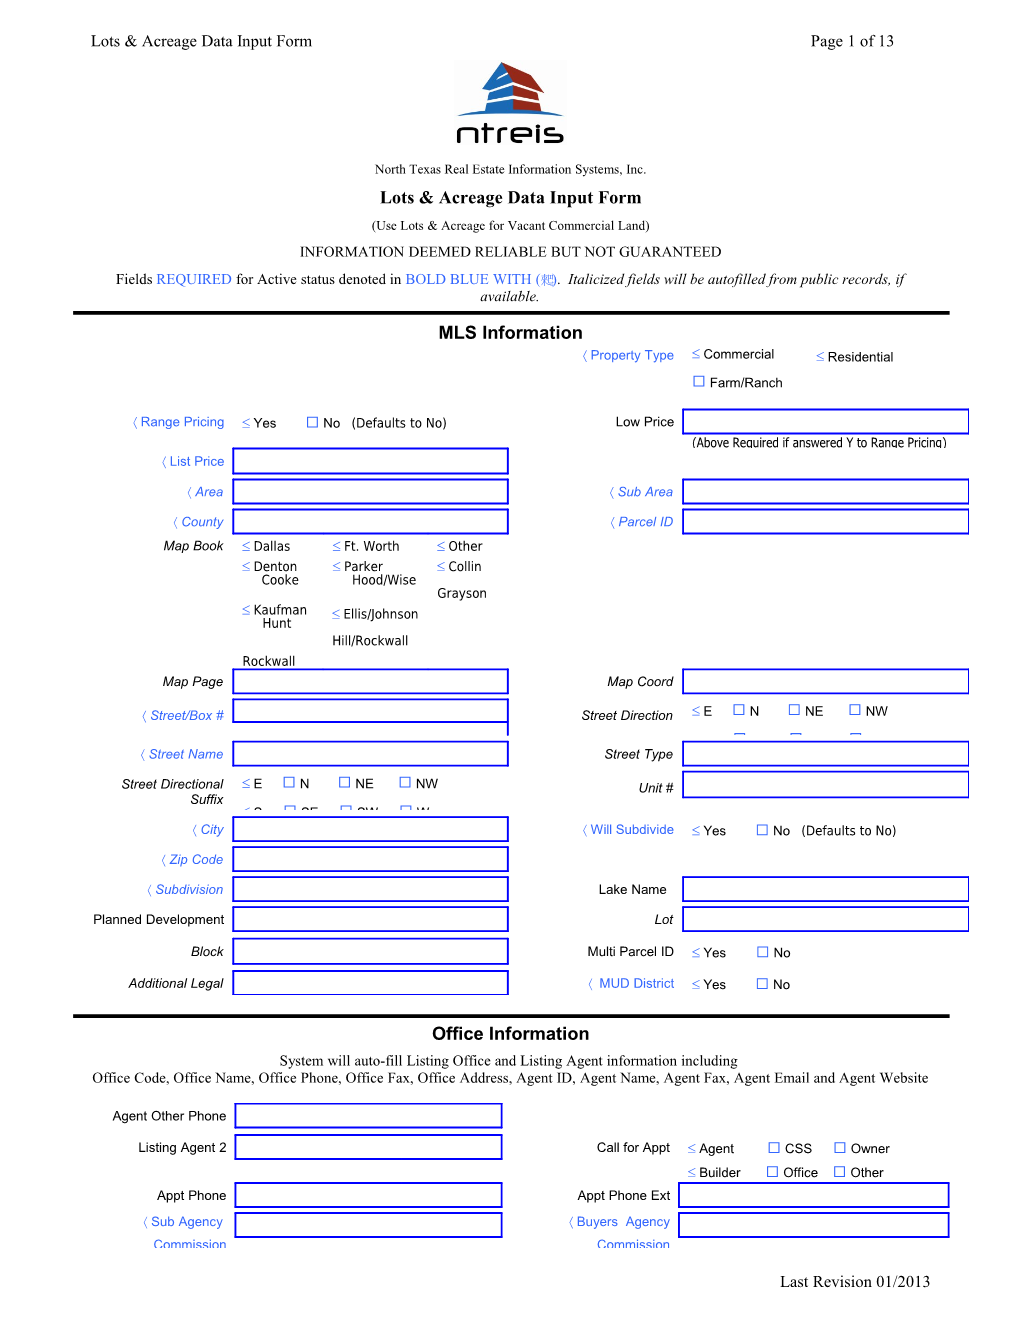 Lots & Acreage Data Input Form Page 9 of 9